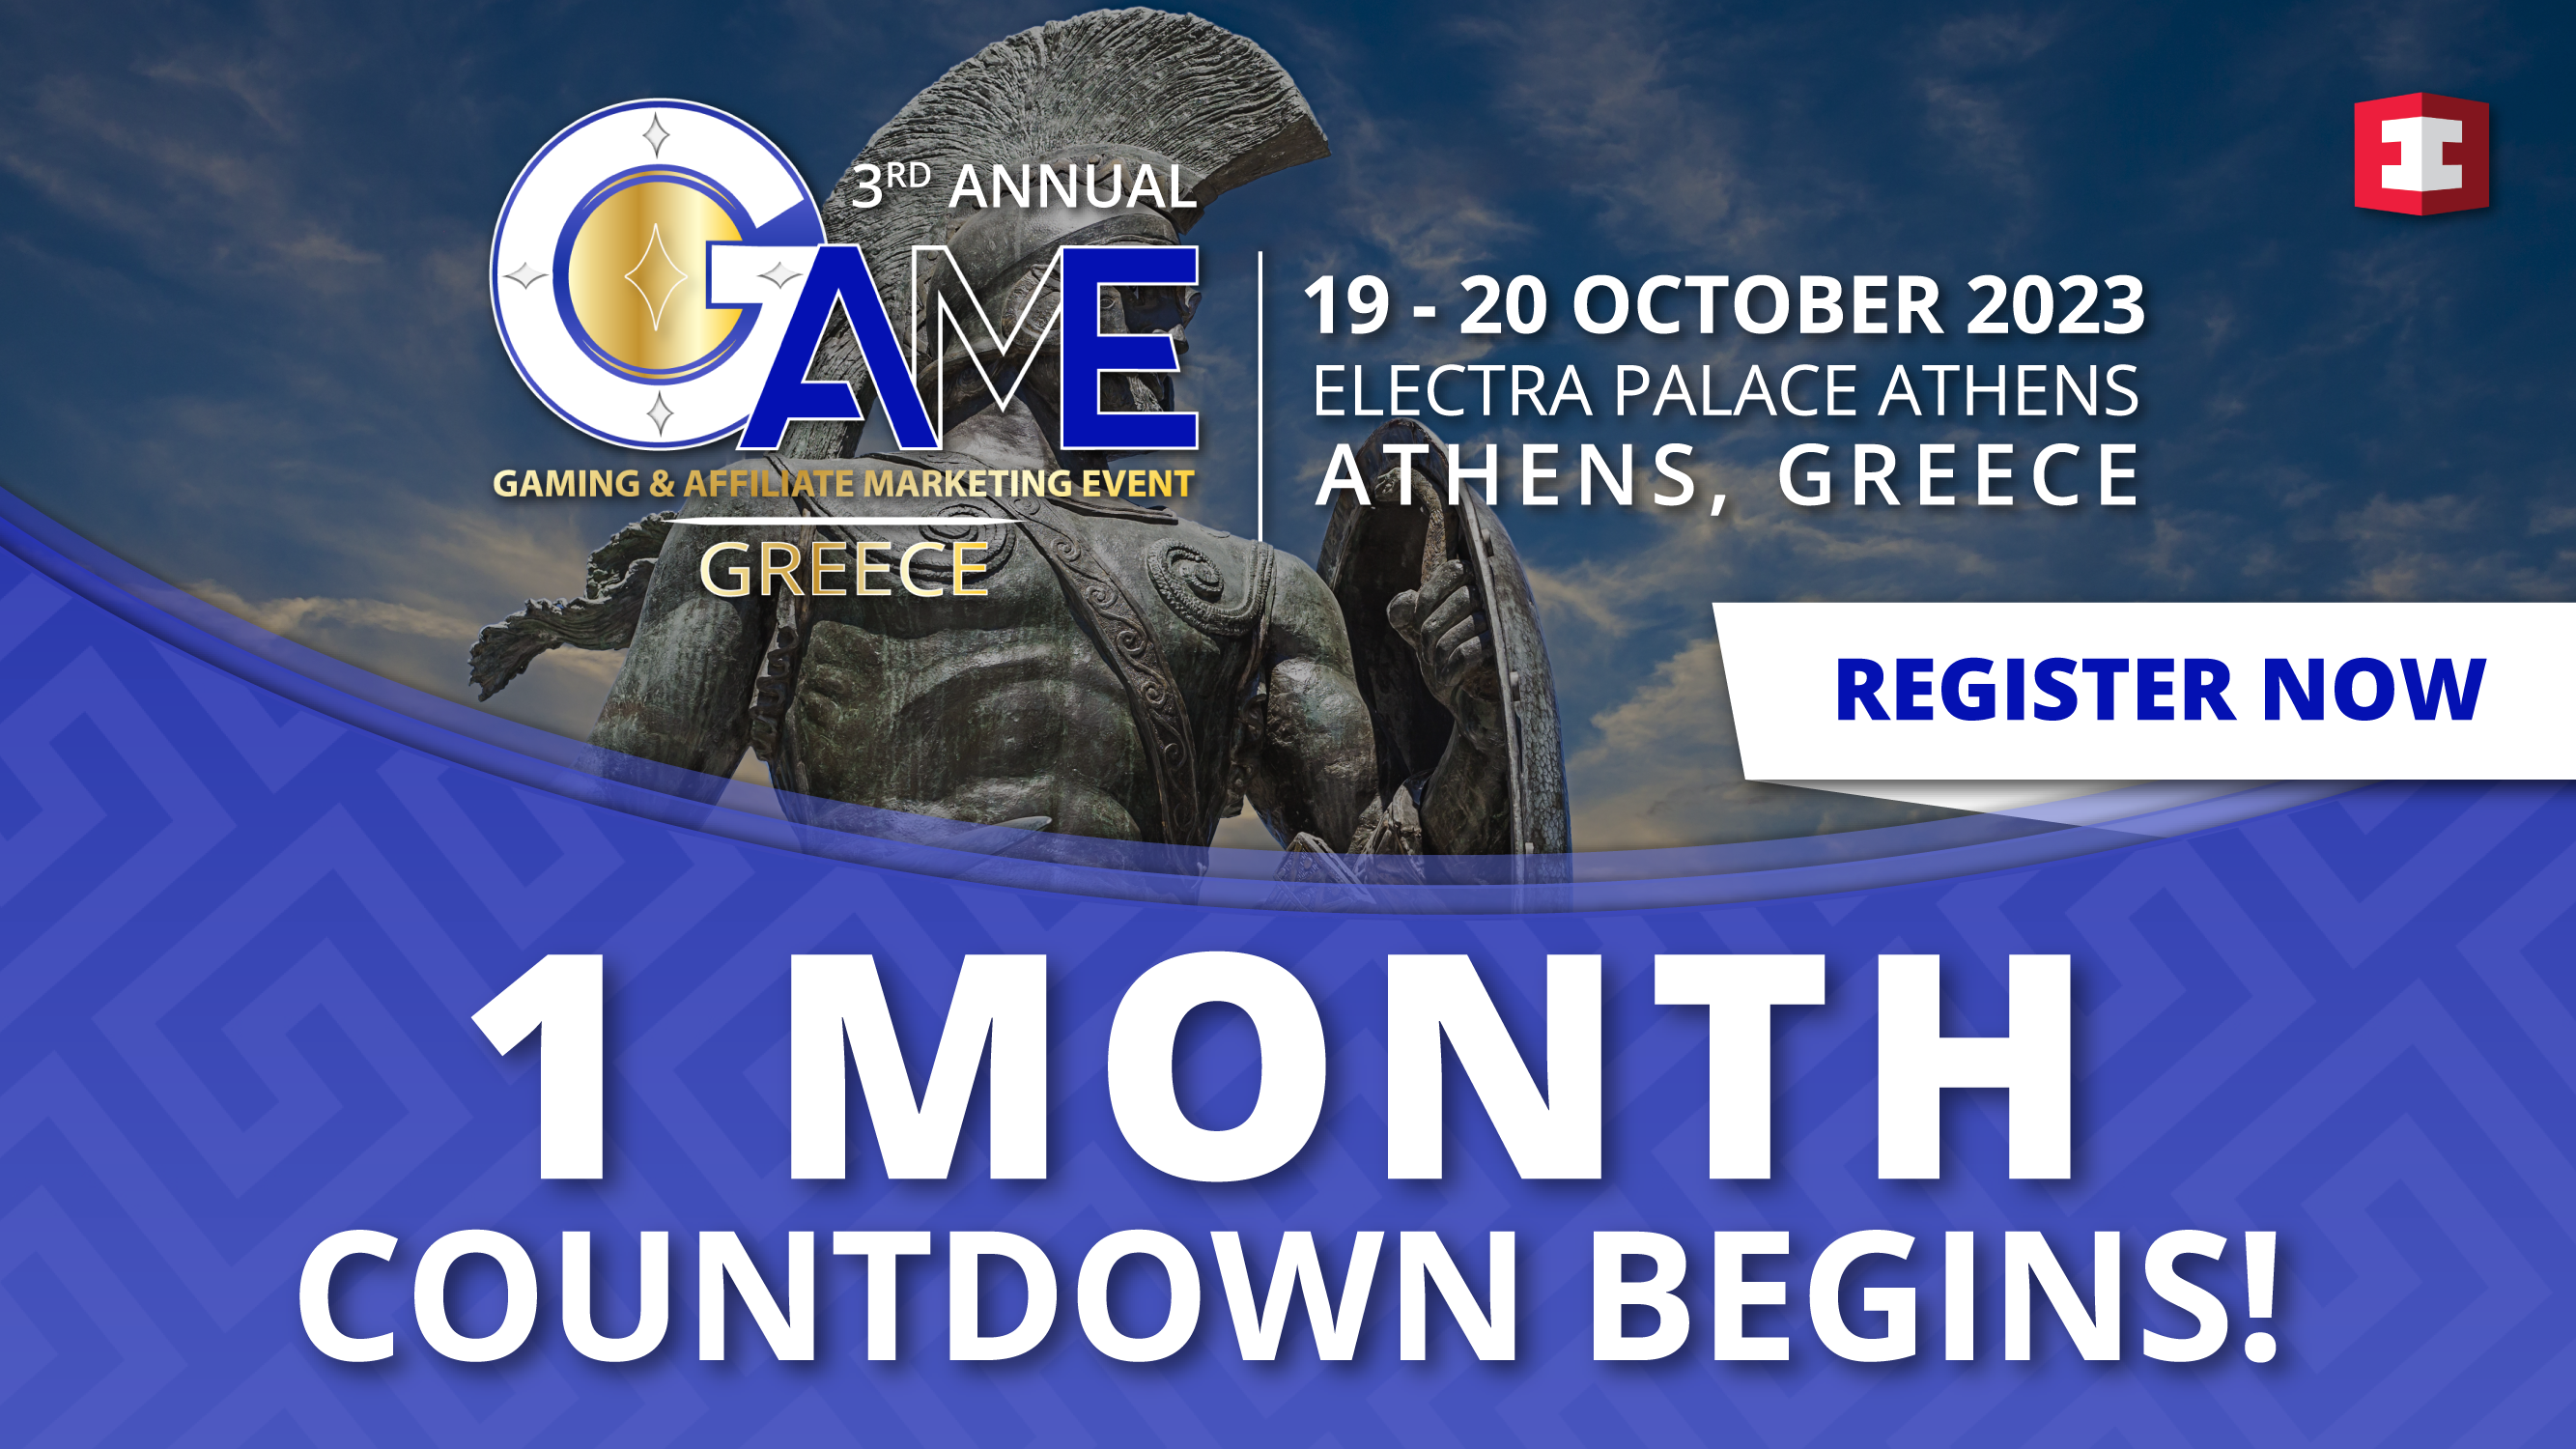 3rd Annual Gaming & Affiliate Marketing Event in Athens